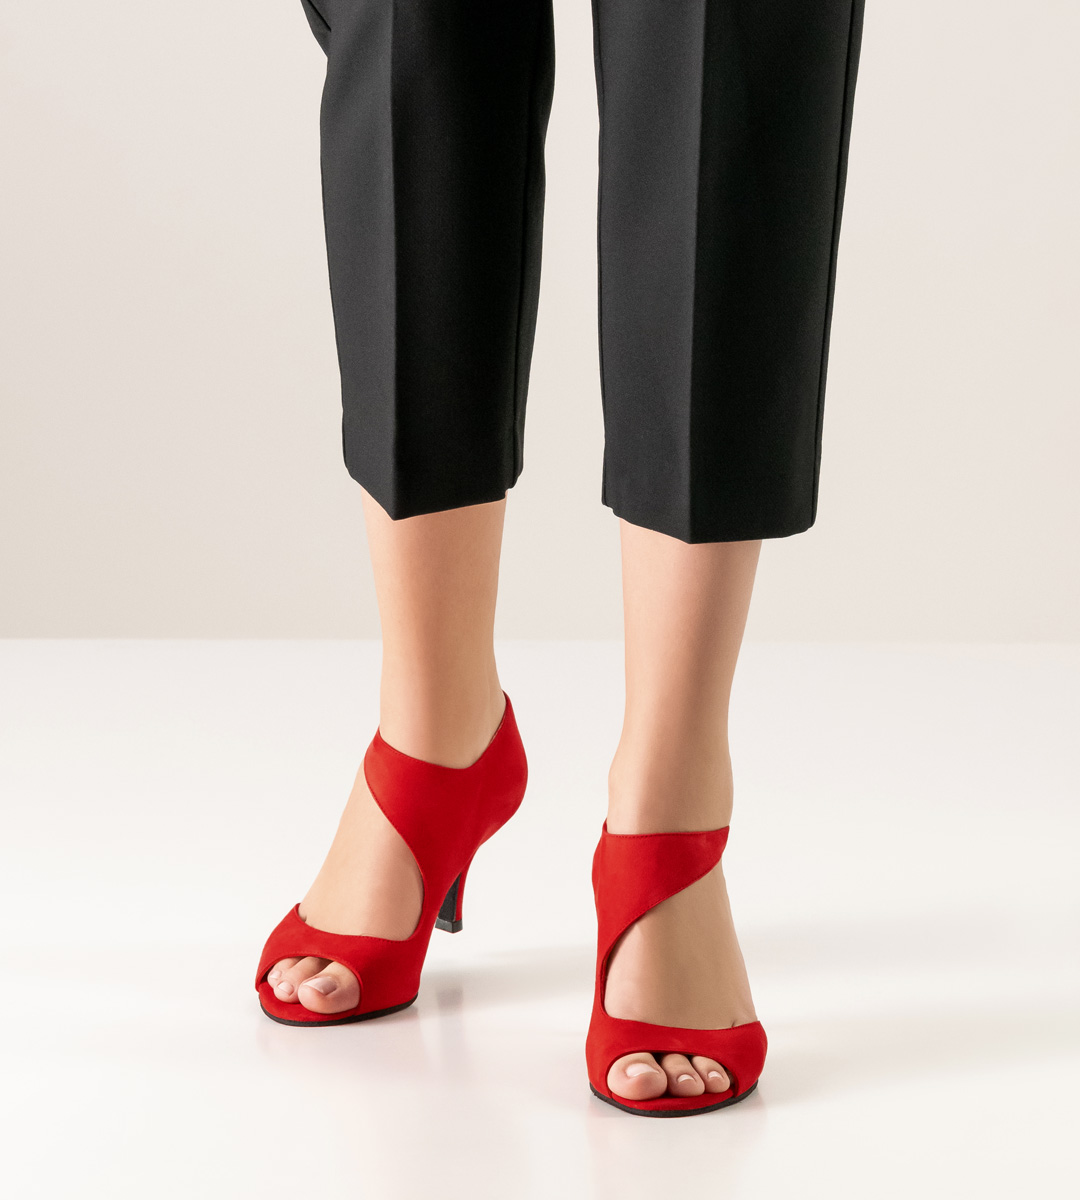 Black trousers in combination with red ladies' dance shoe from Nueva Epoca